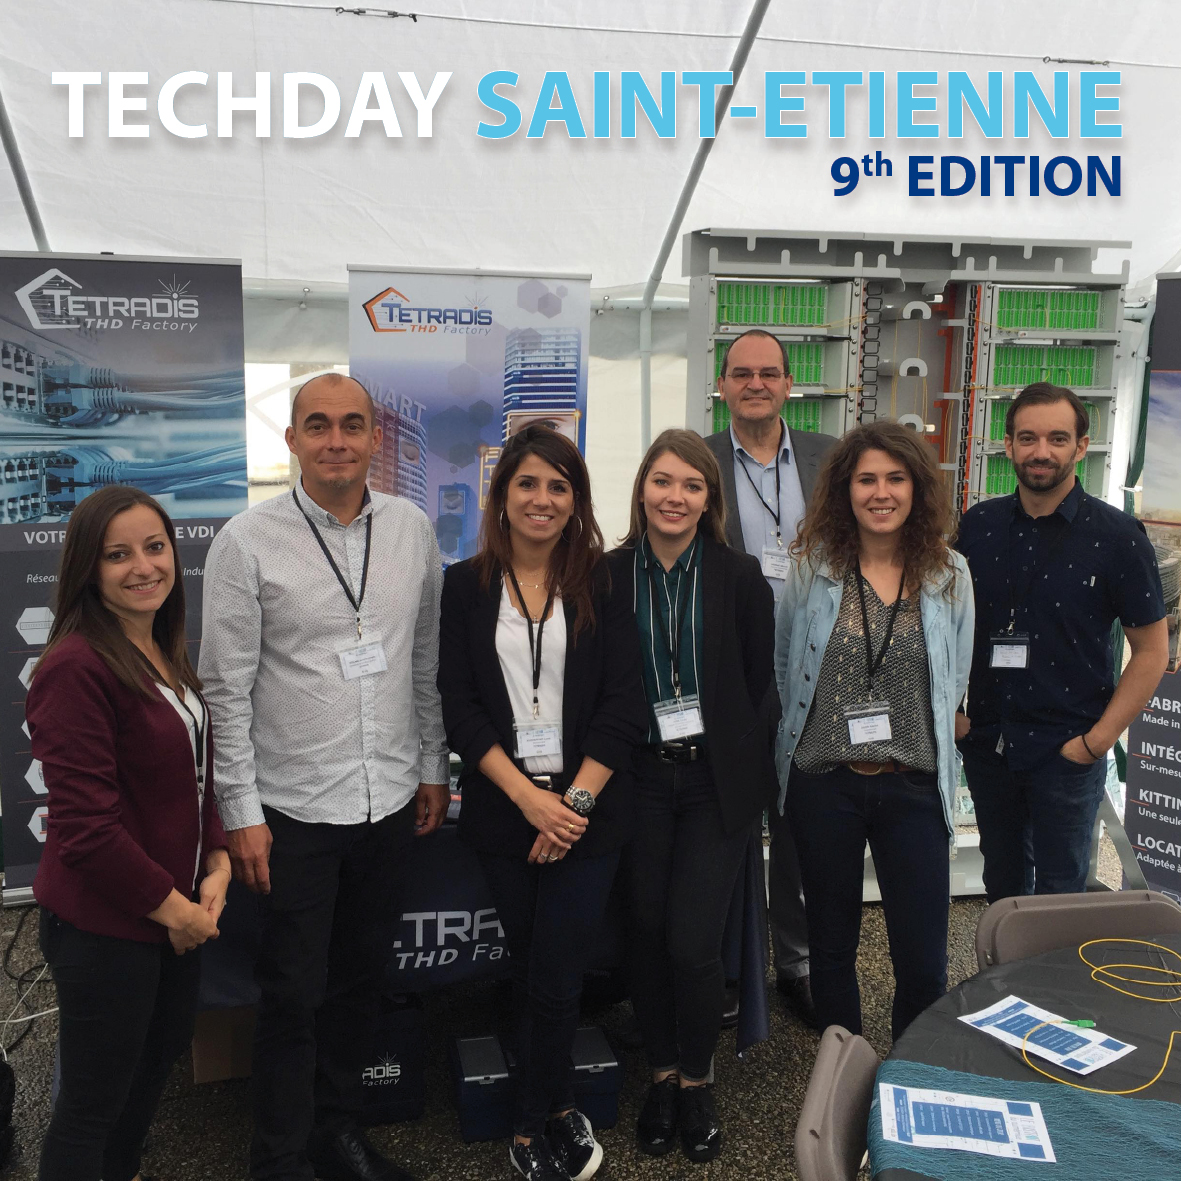 9th edition of Saint-Etienne TECHDAY